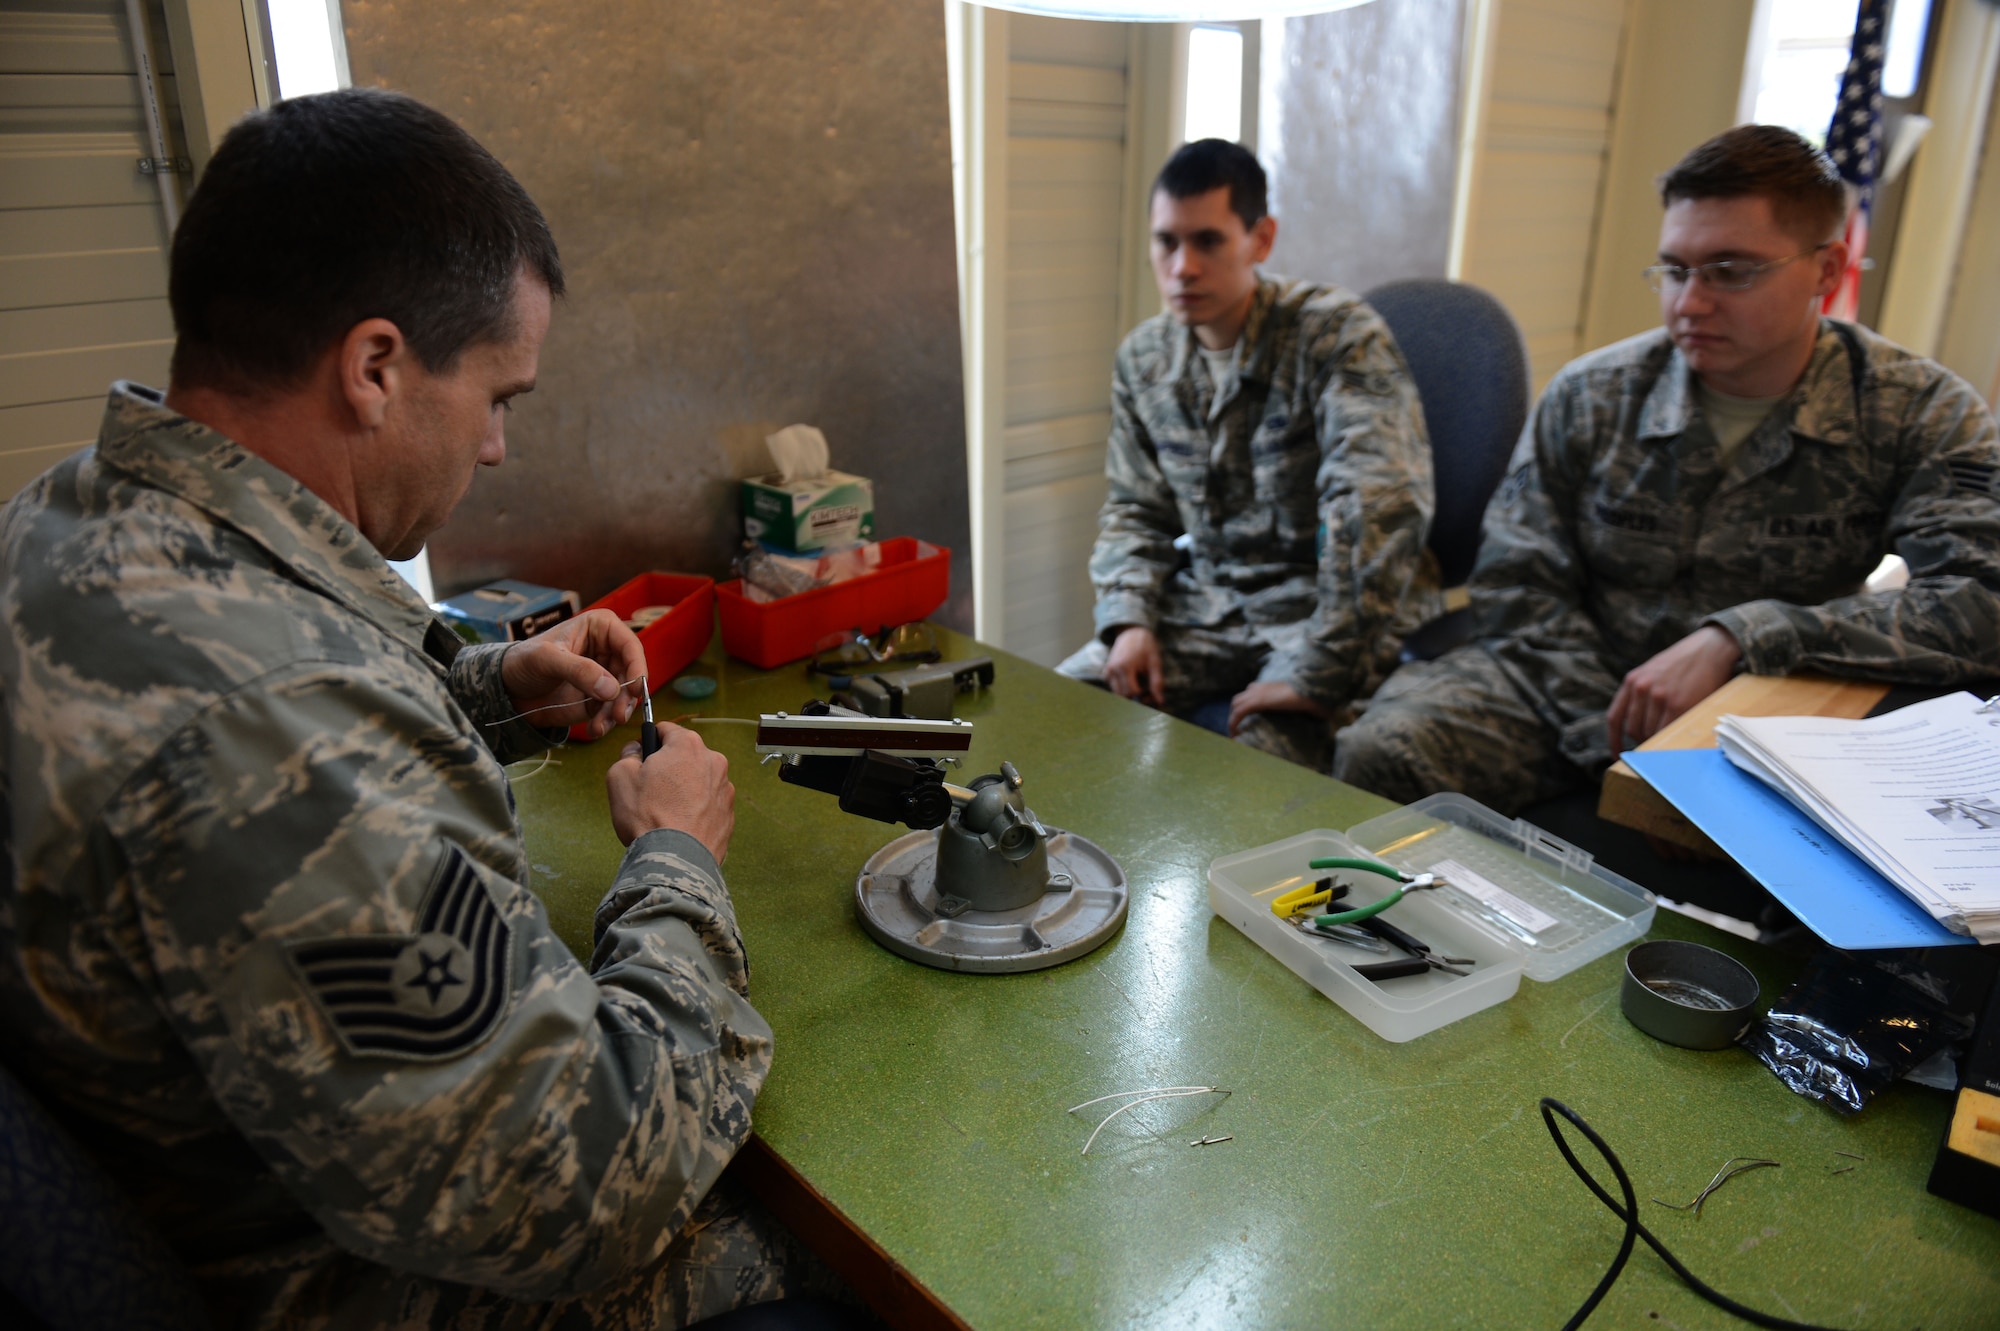 SPANGDAHLEM AIR BASE, Germany – U.S. Air Force Tech. Sgt. Mark Salzman, 372nd Training Squadron avionics instructor from Sunrise, Fla., left, demonstrates proper soldering technique for U.S. Air Force Airman 1st Class Enrique Campbell, 52nd Component Maintenance Squadron electronic warfare systems technician from Laredo, Texas, and U.S. Air Force Senior Airman Christopher Peoples, 52nd CMS electronic warfare systems technician from Mount Pocono, Pa., during a soldering class Sept. 10, 2013. The four-day course covers basic safety and risk management for soldering, along with basic soldering techniques. (U.S. Air Force photo by Airman 1st Class Gustavo Castillo/Released) 